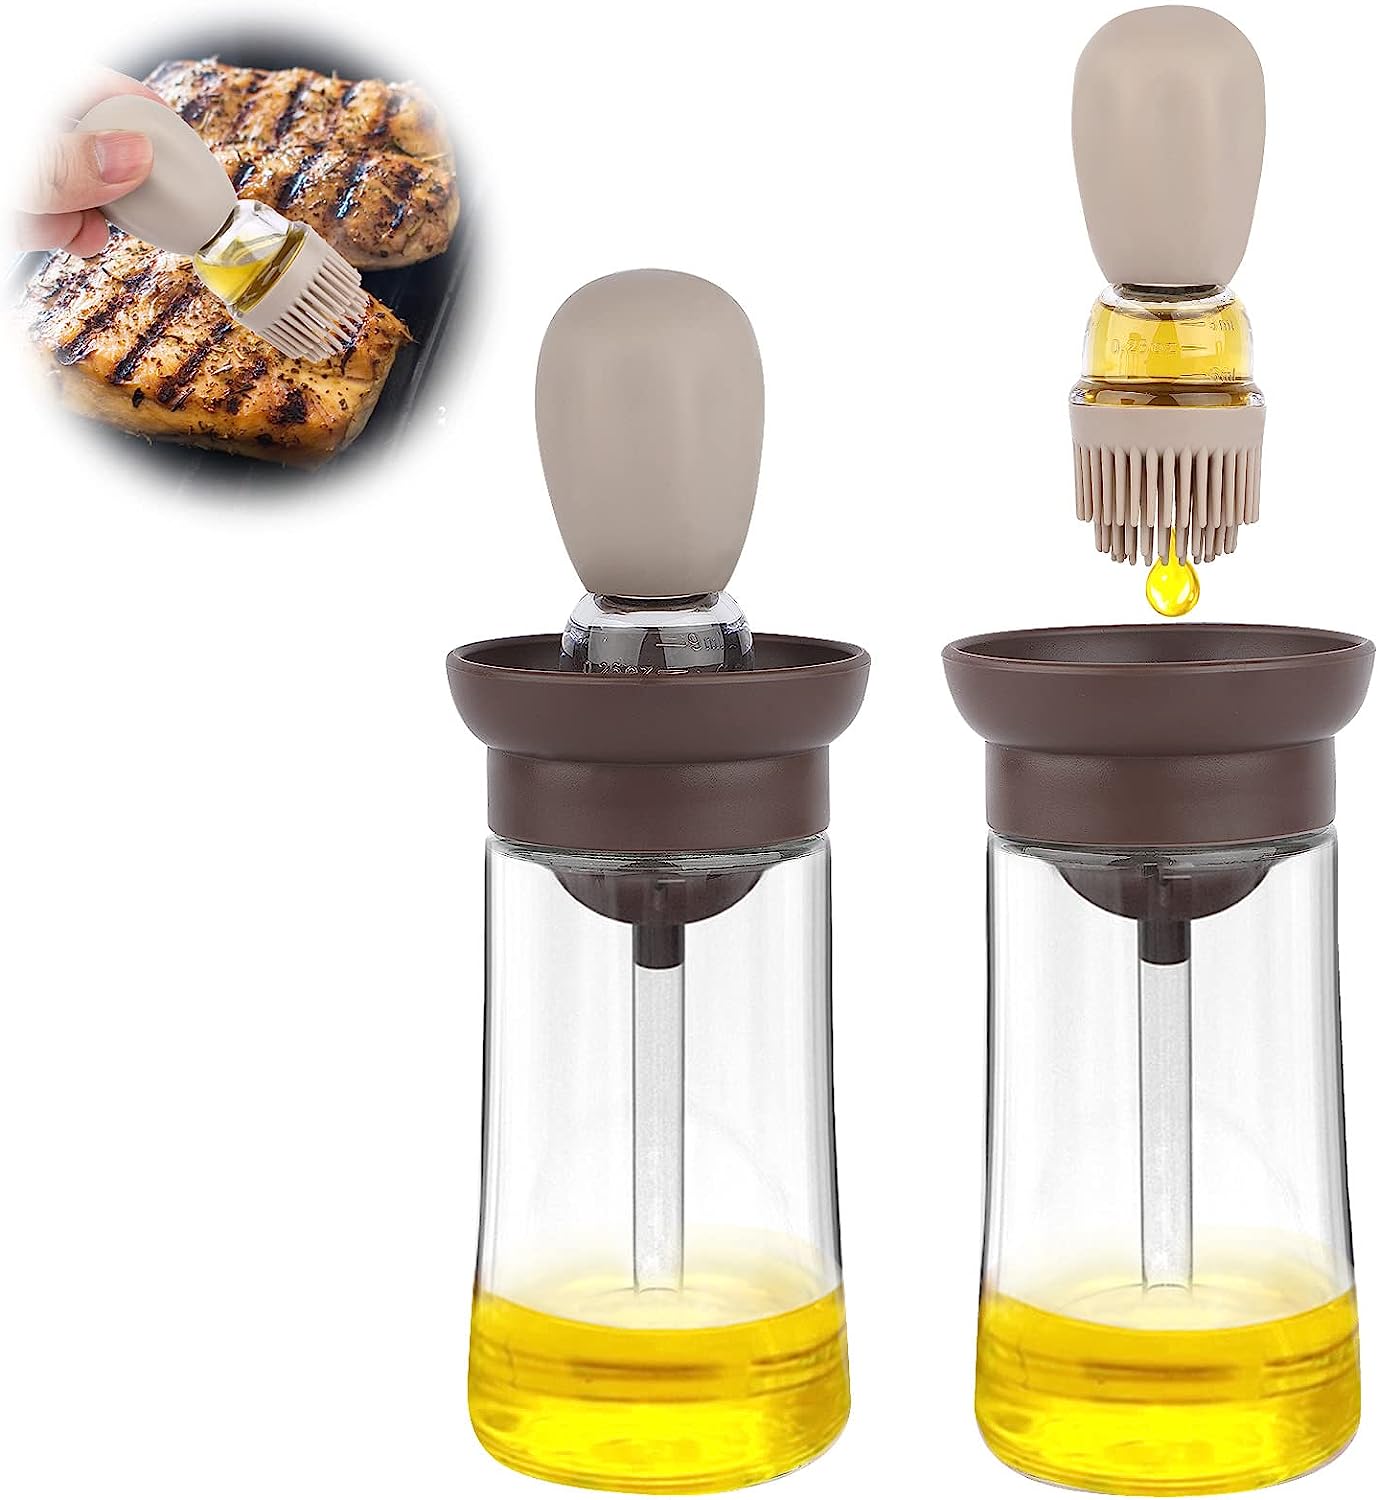 Deidentified Glass Olive Oil Bottle with Brown Silicone Brush 2 in 1 Dispenser RRP 9.99 CLEARANCE XL 6.99